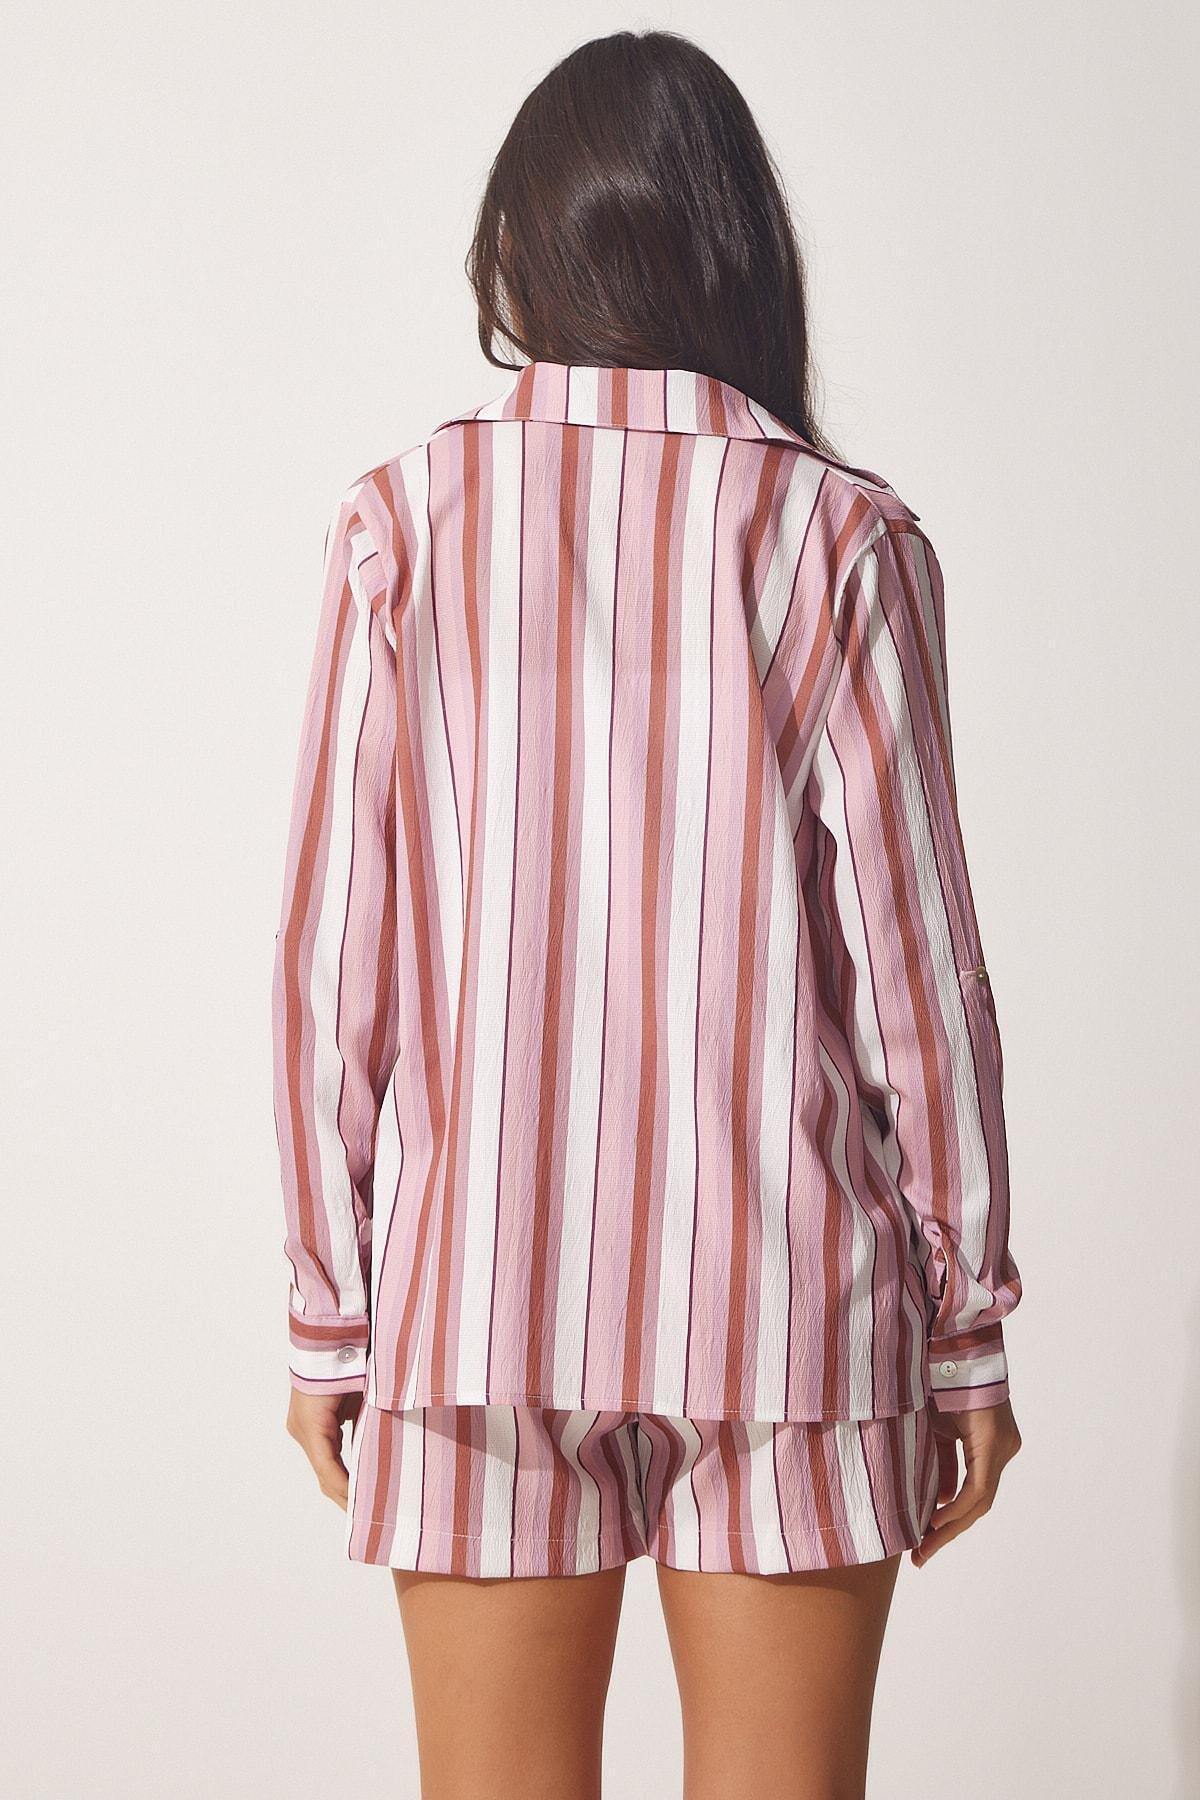 Happiness Istanbul - Pink Striped Co-Ord Set